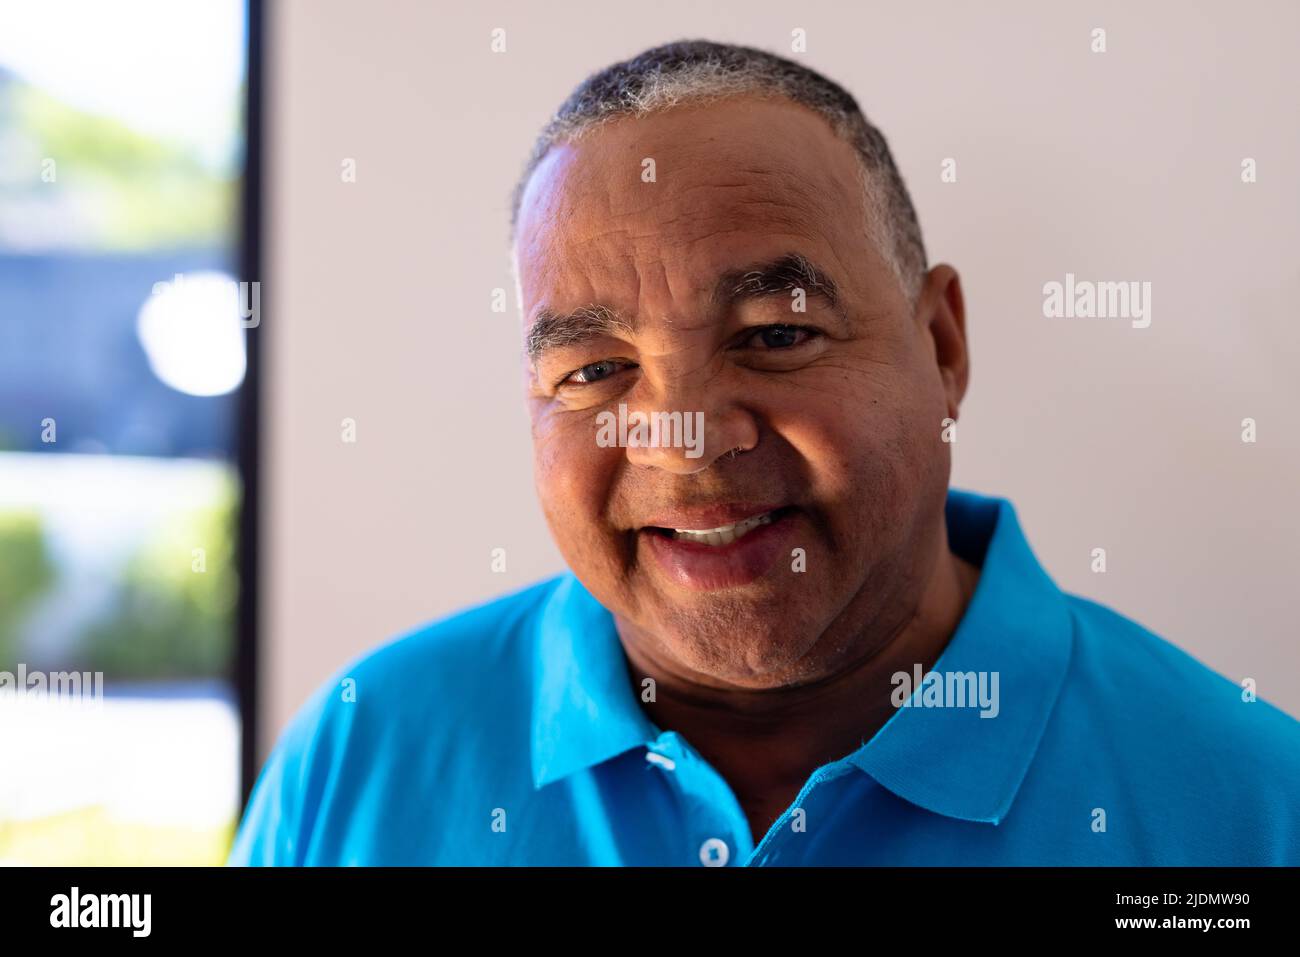 Close-up portrait of smiling biracial senior man against white wall in retirement home, copy space Stock Photo